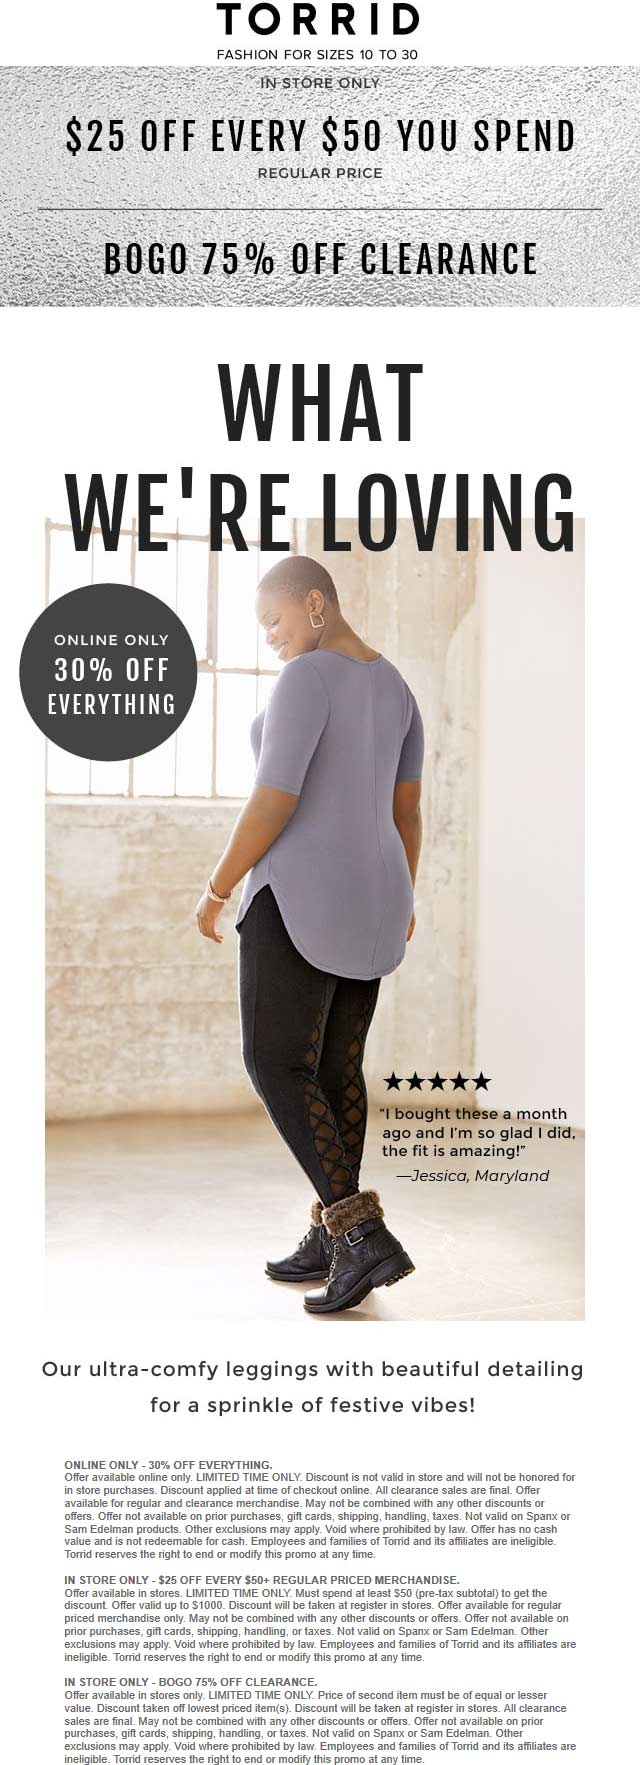 Torrid September 2021 Coupons and Promo Codes 🛒